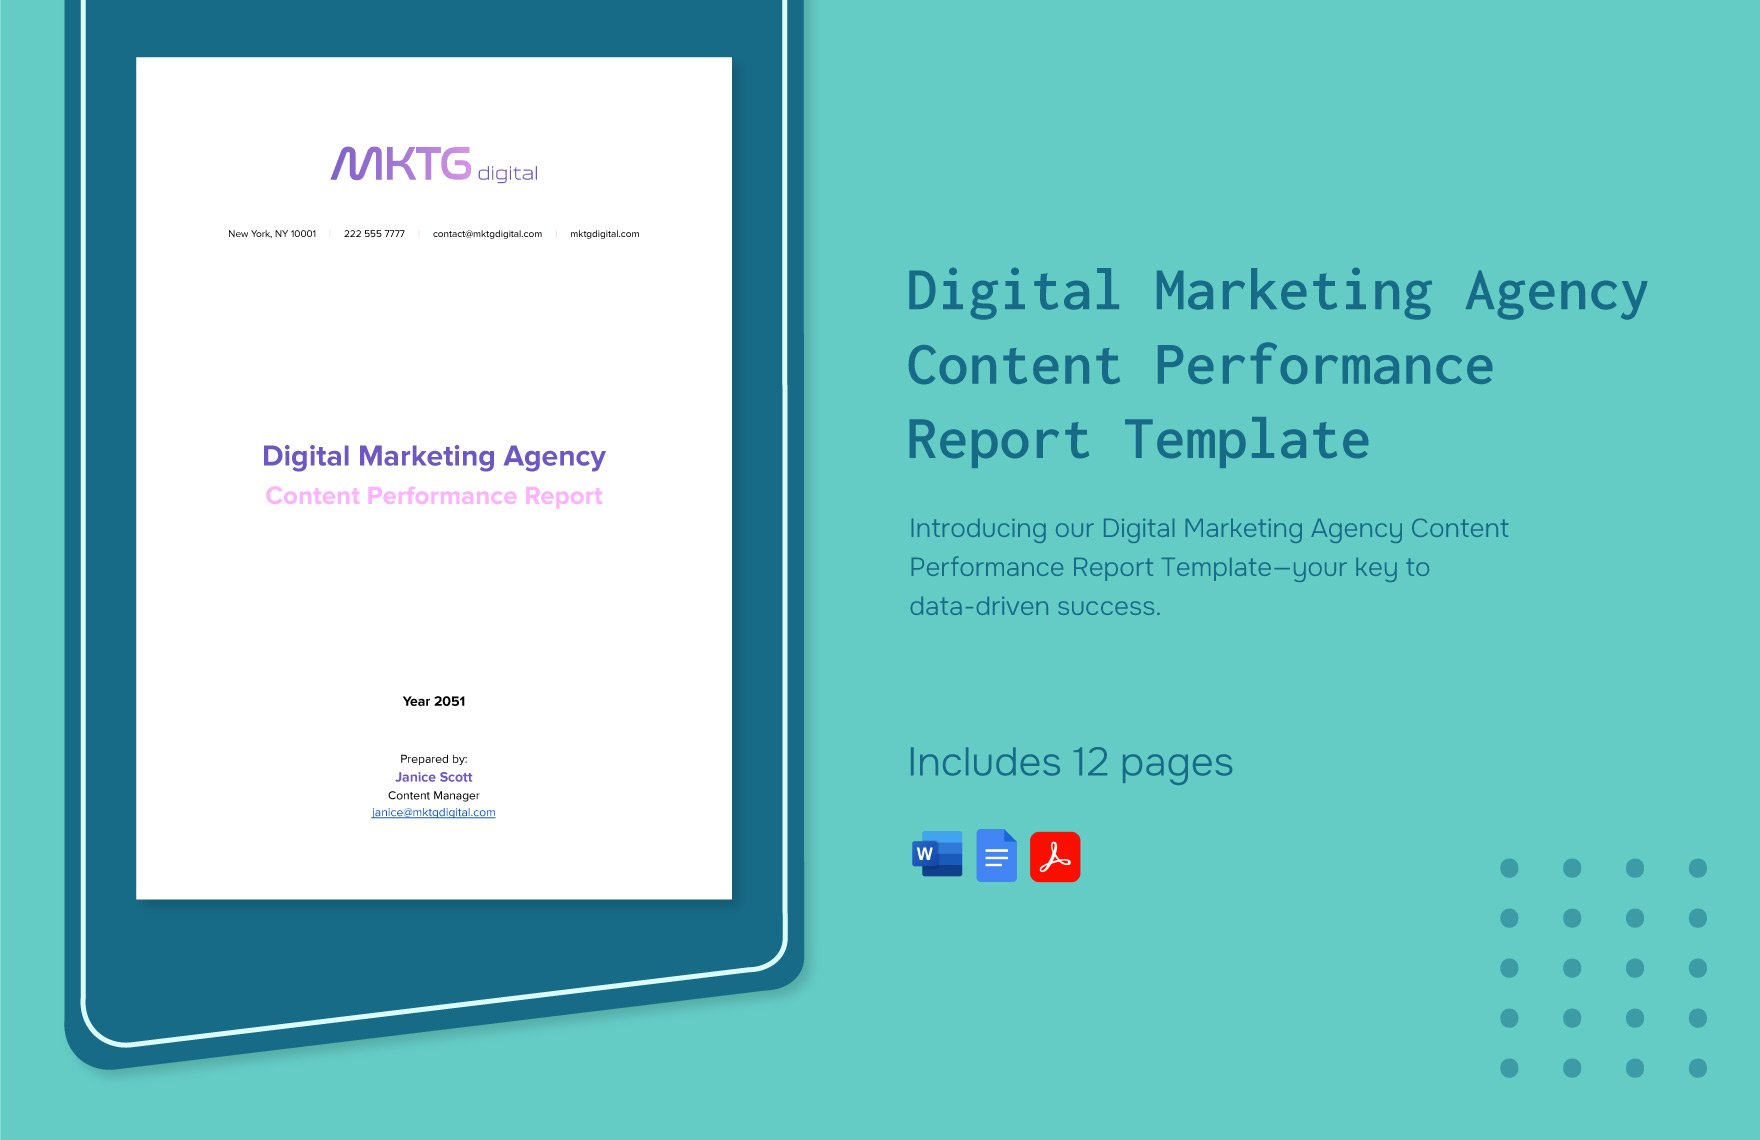 Digital Marketing Agency Content Performance Report Template